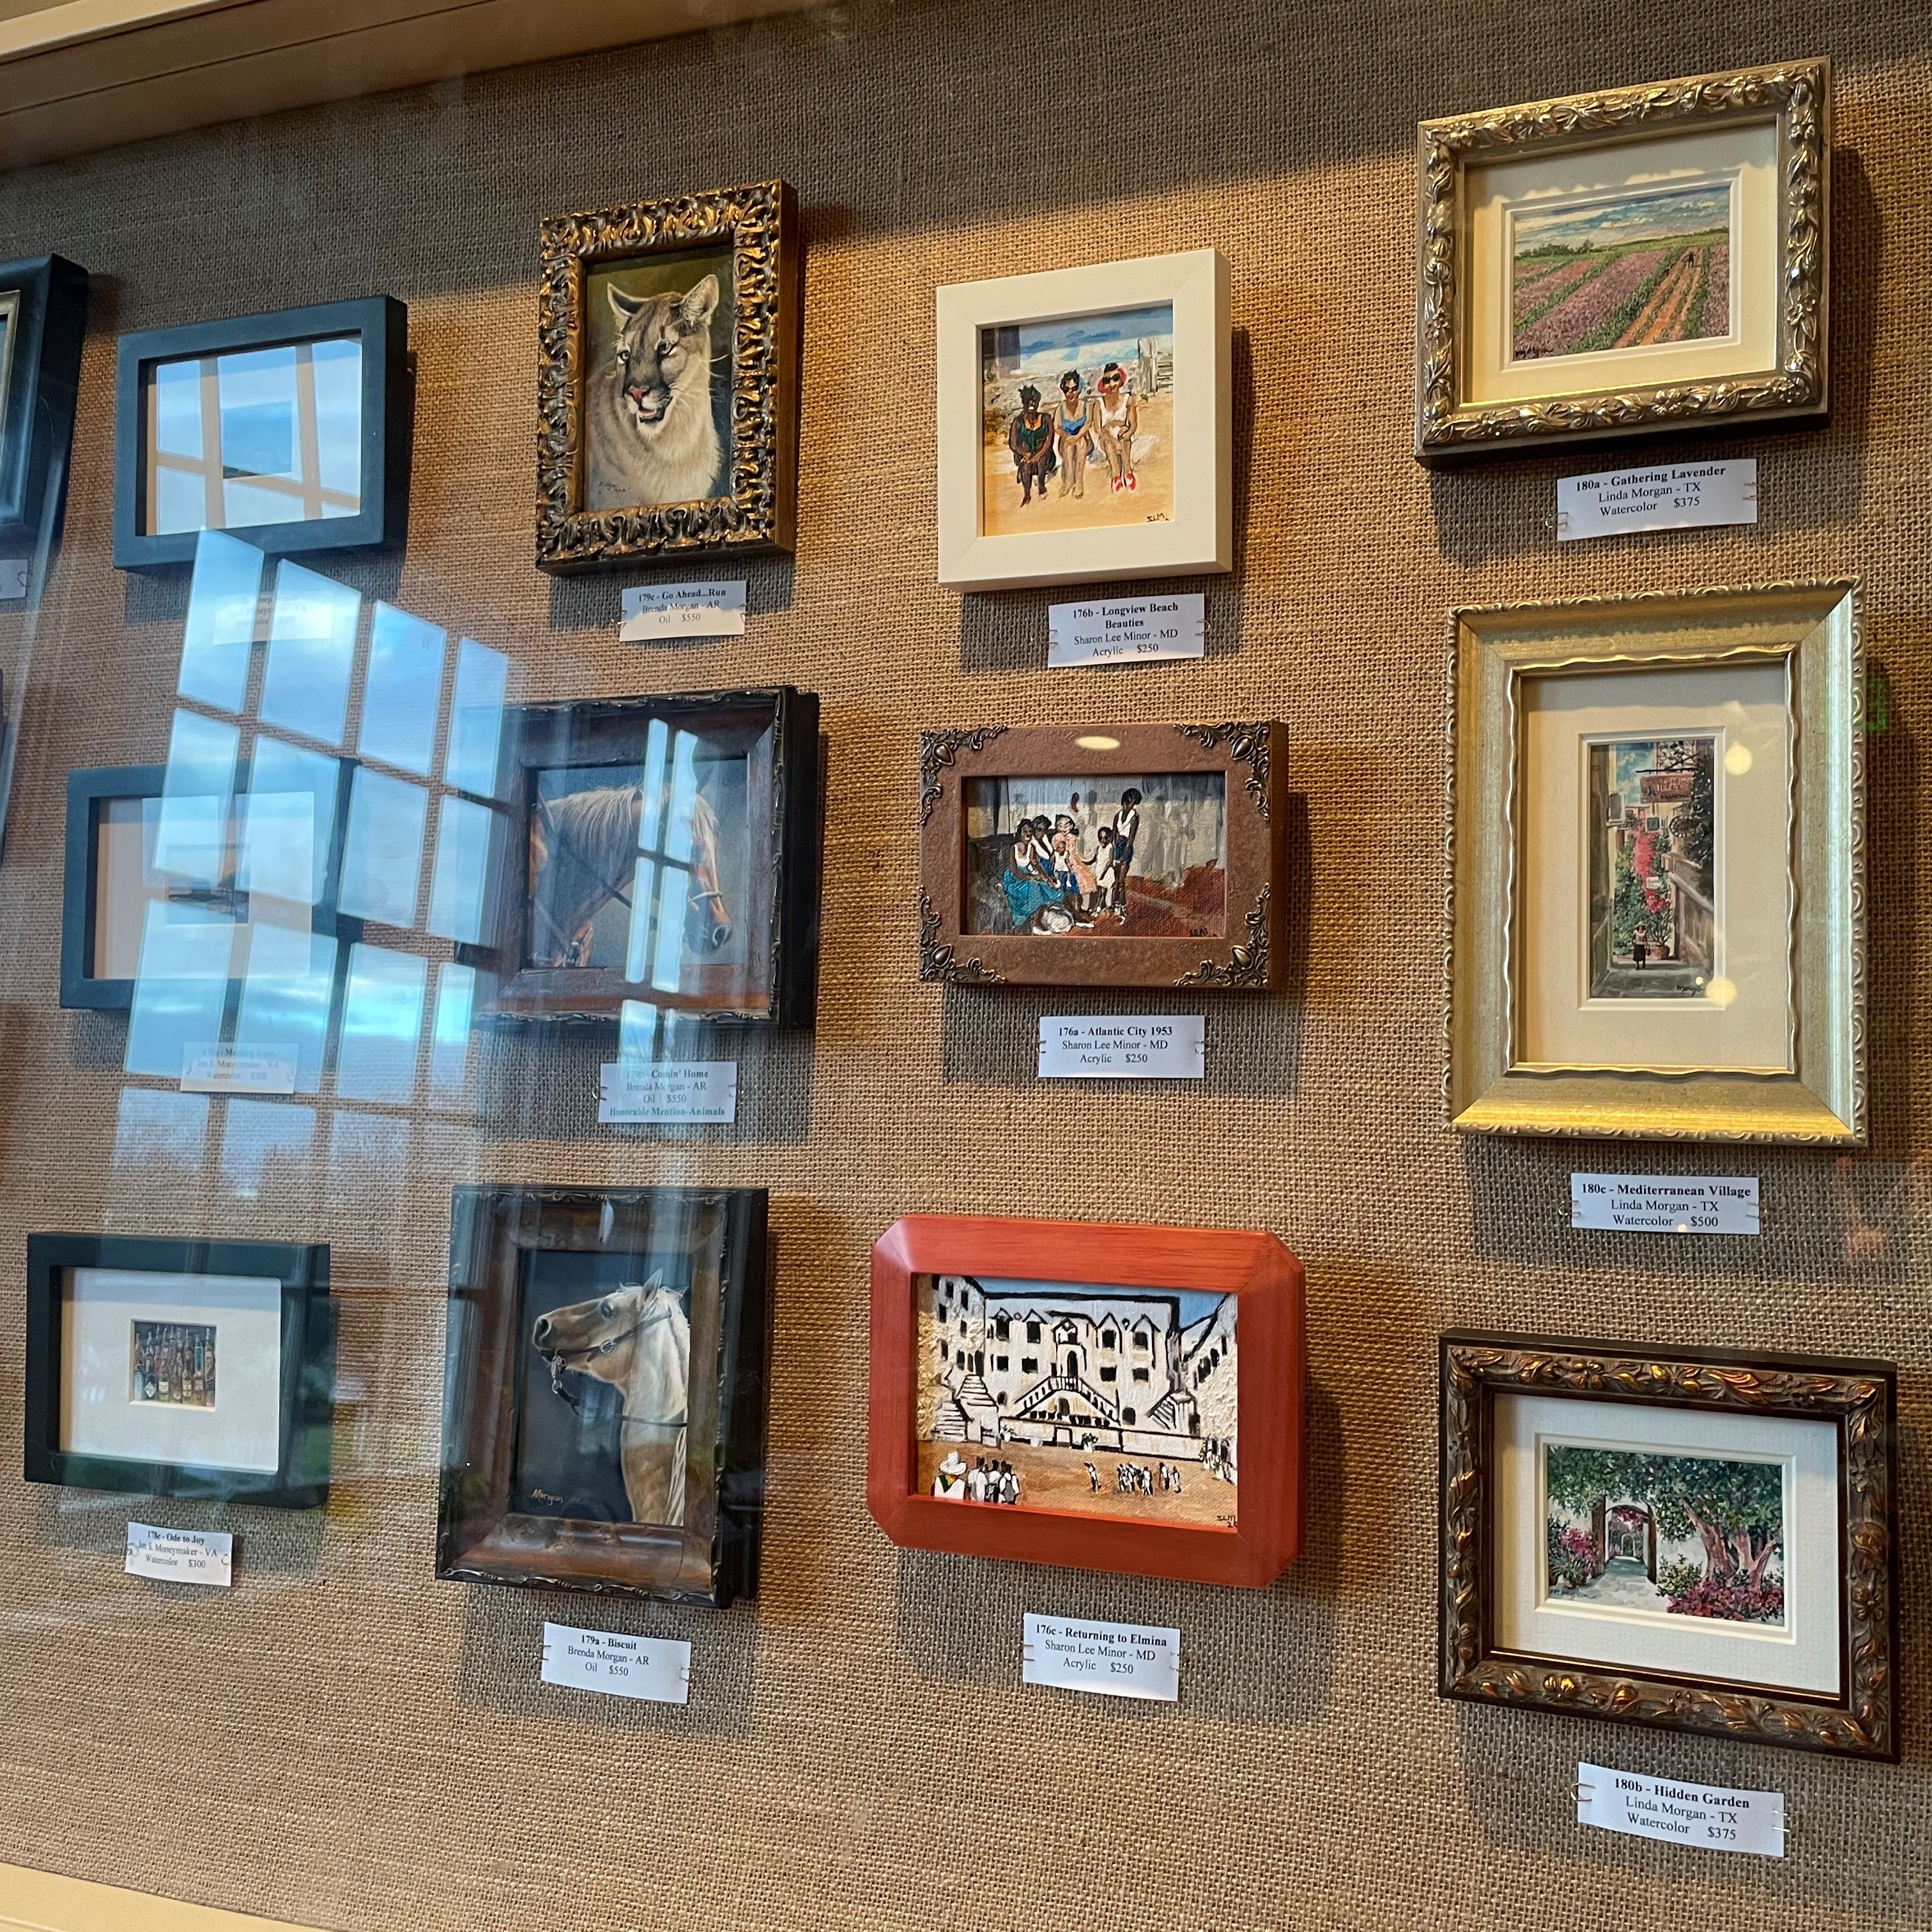 Artwork on display in the annual exhibition of fine art in miniature